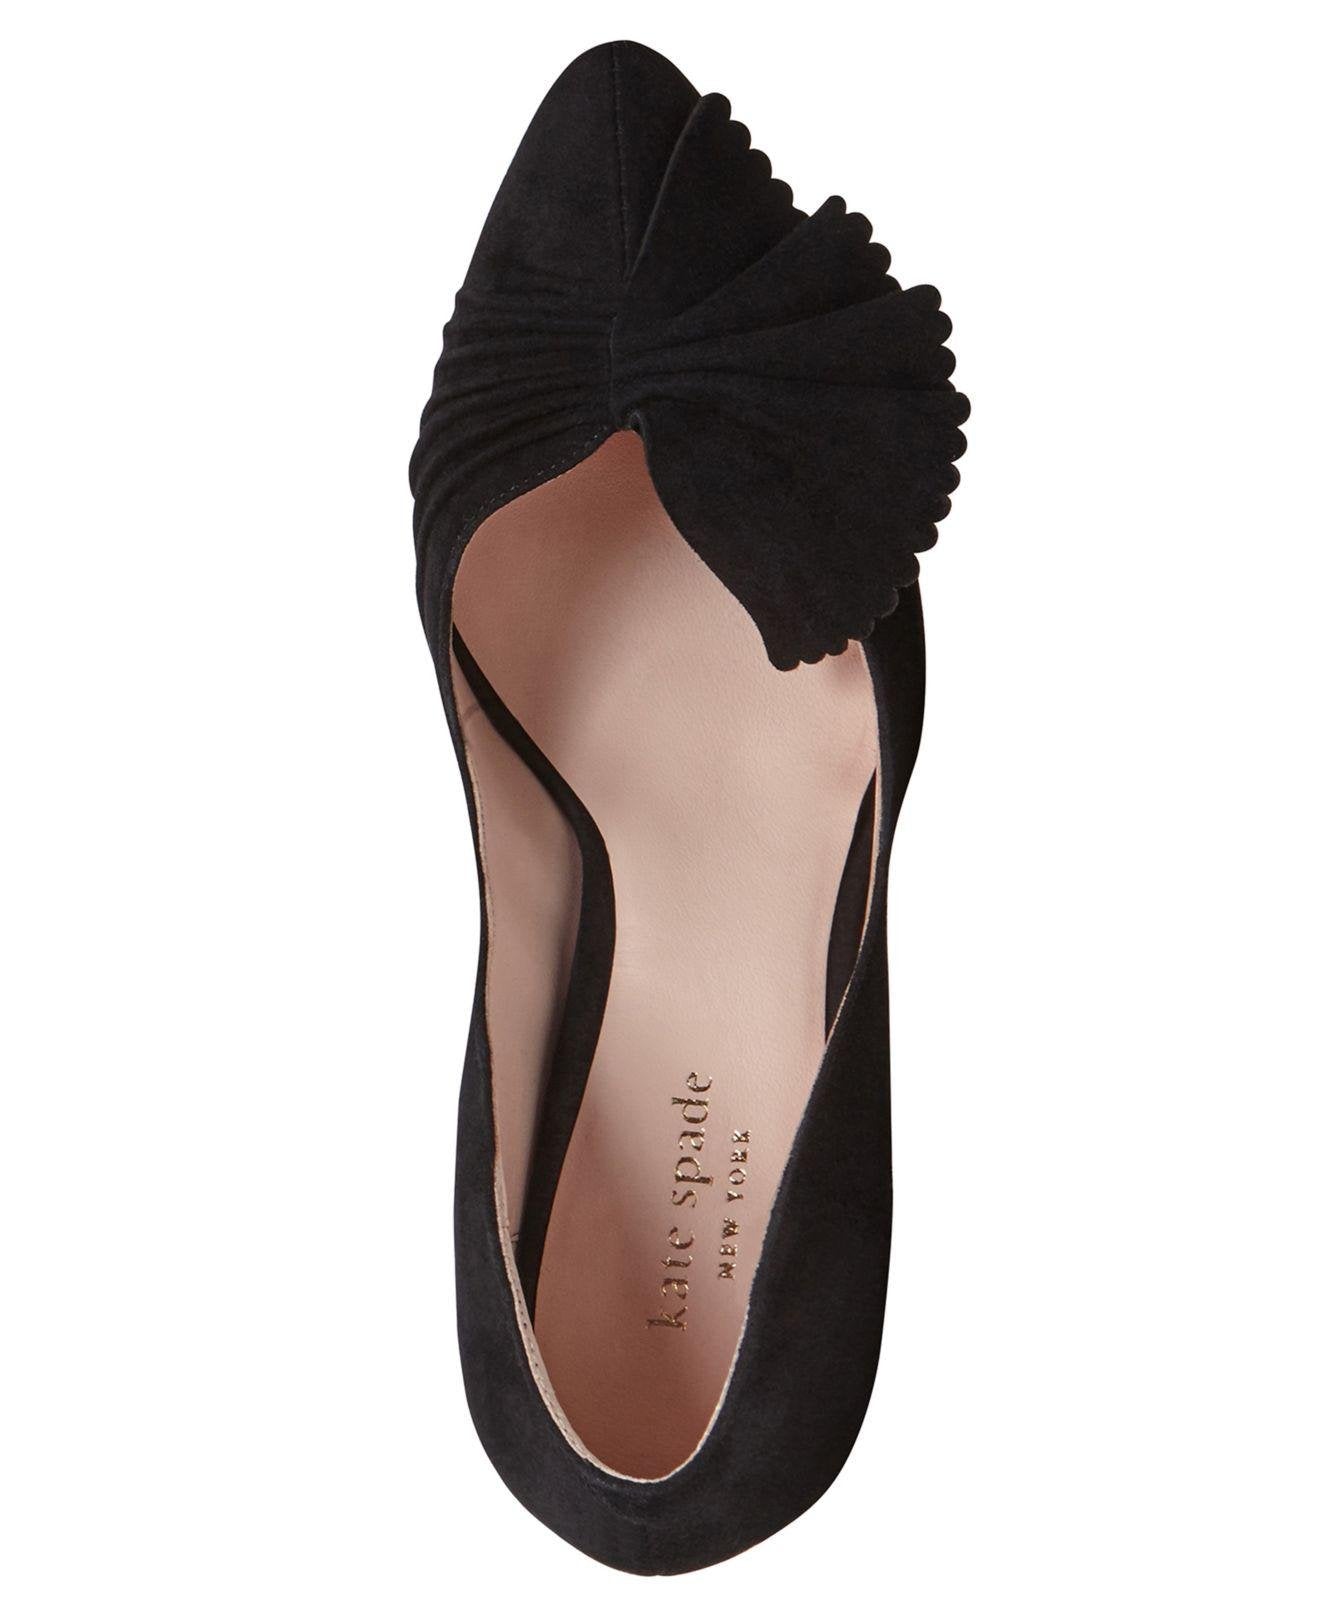 KATE SPADE - ALESSIA SUEDE PUMPS **FREE SHIPPING** – Chloe Nickie